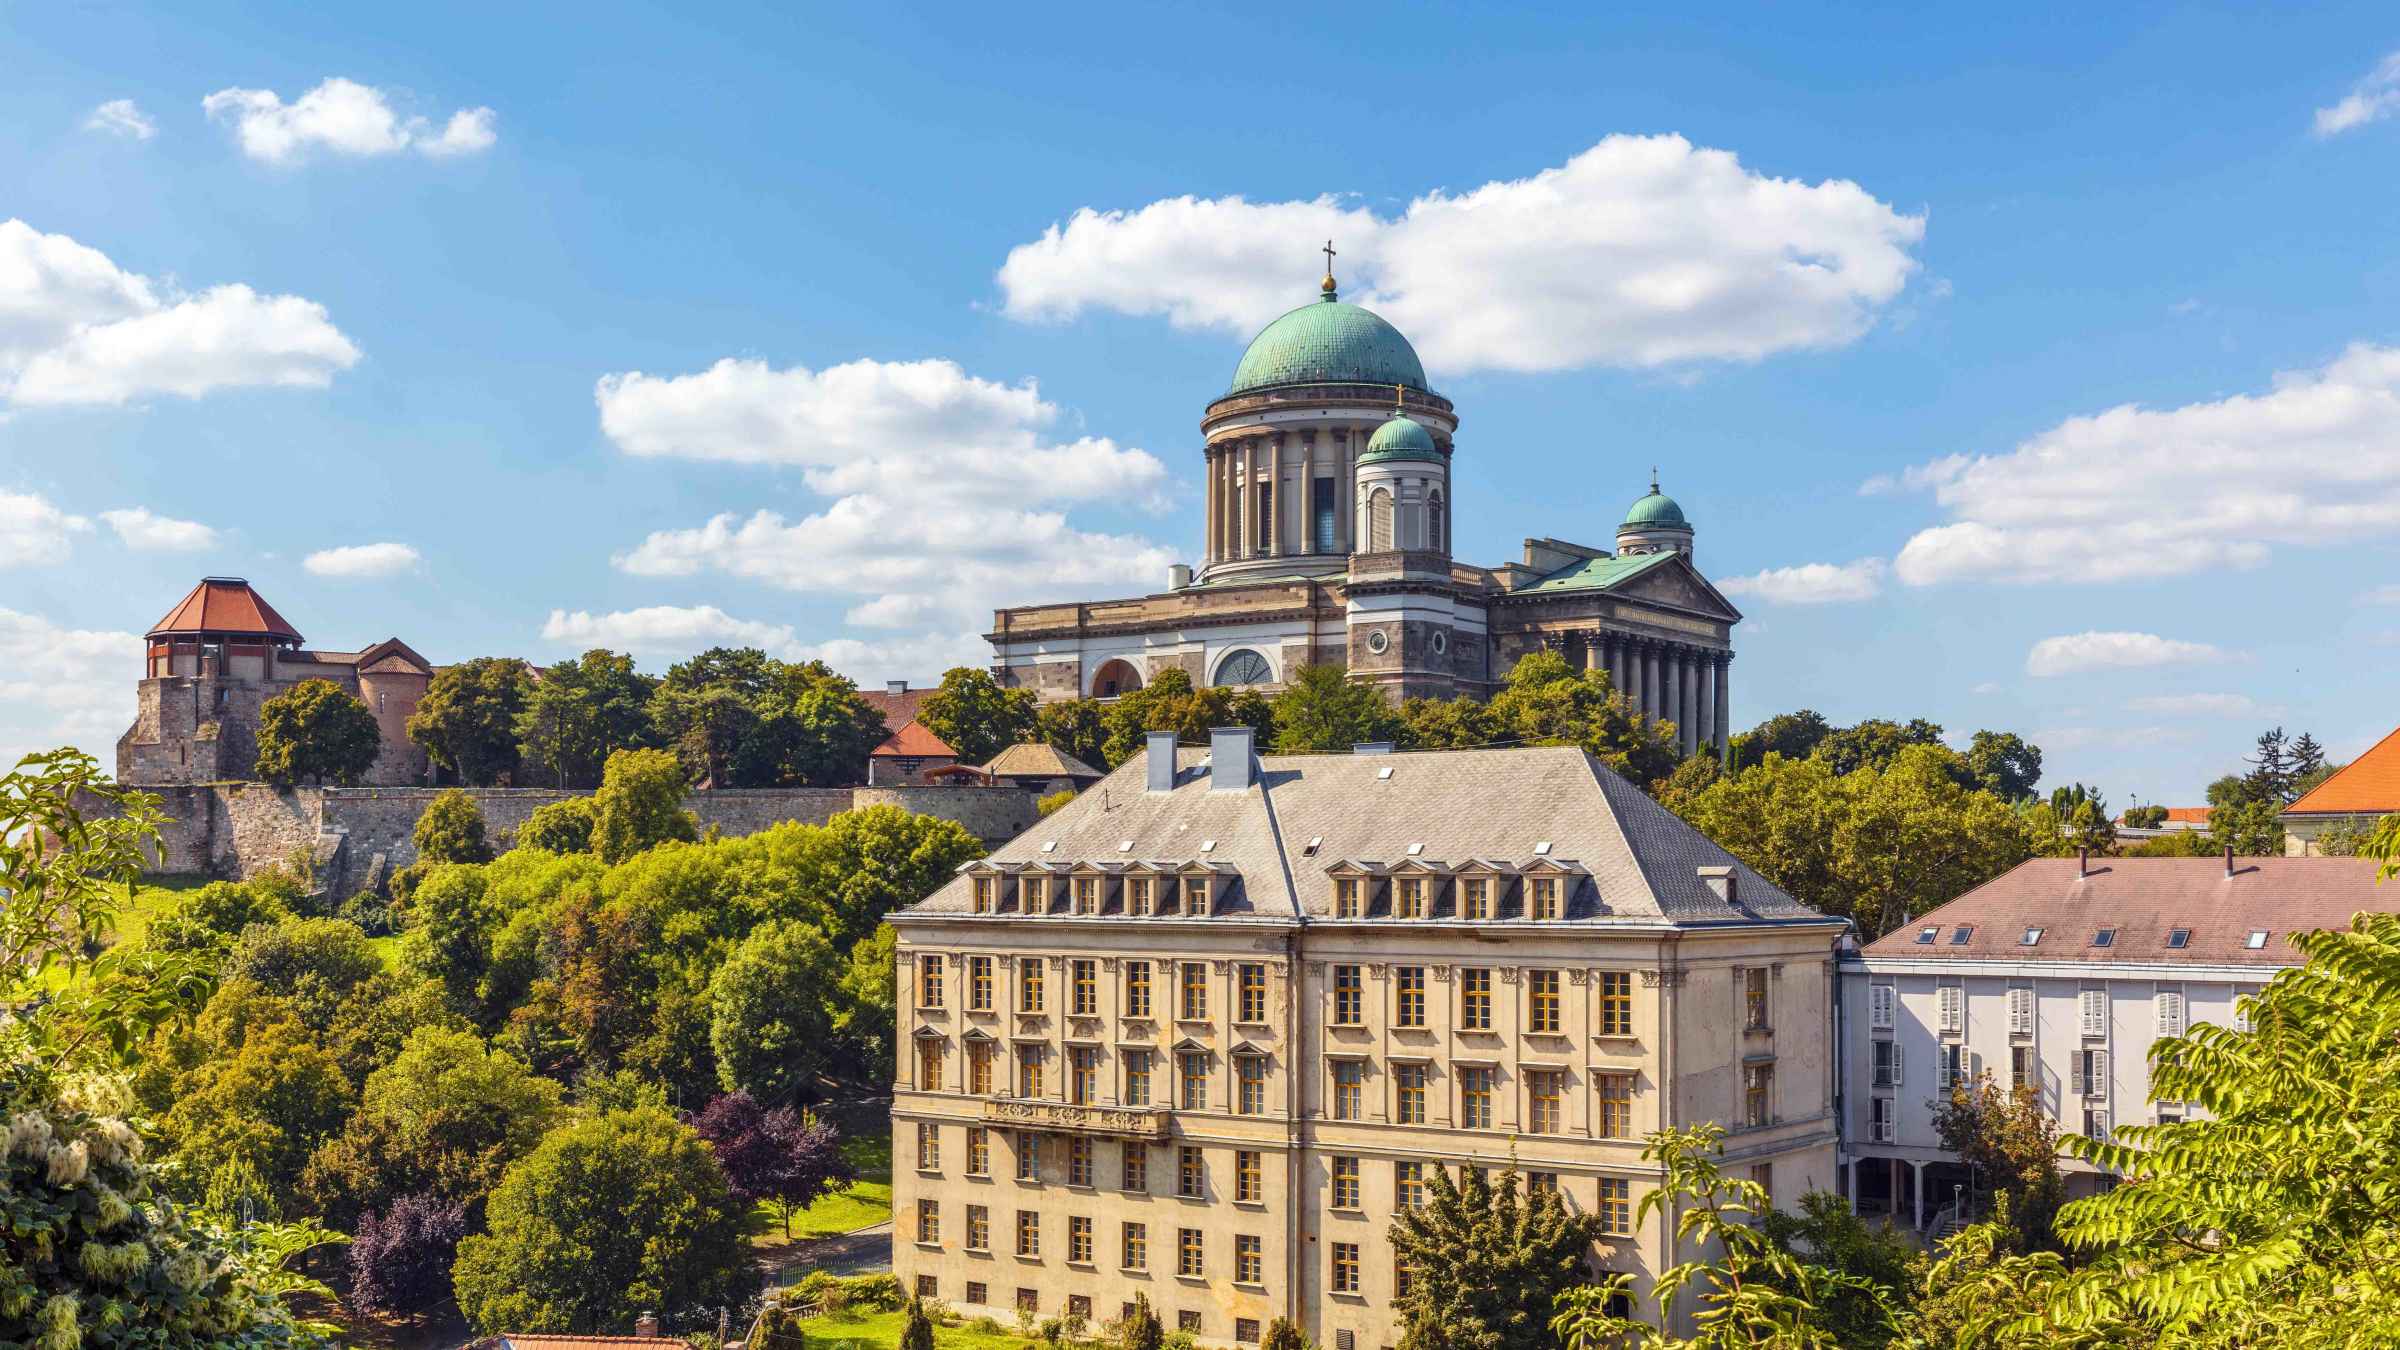 Esztergom 2021: Top 10 Tours &amp; Activities (with Photos) - Things to Do in Esztergom, Hungary | GetYourGuide